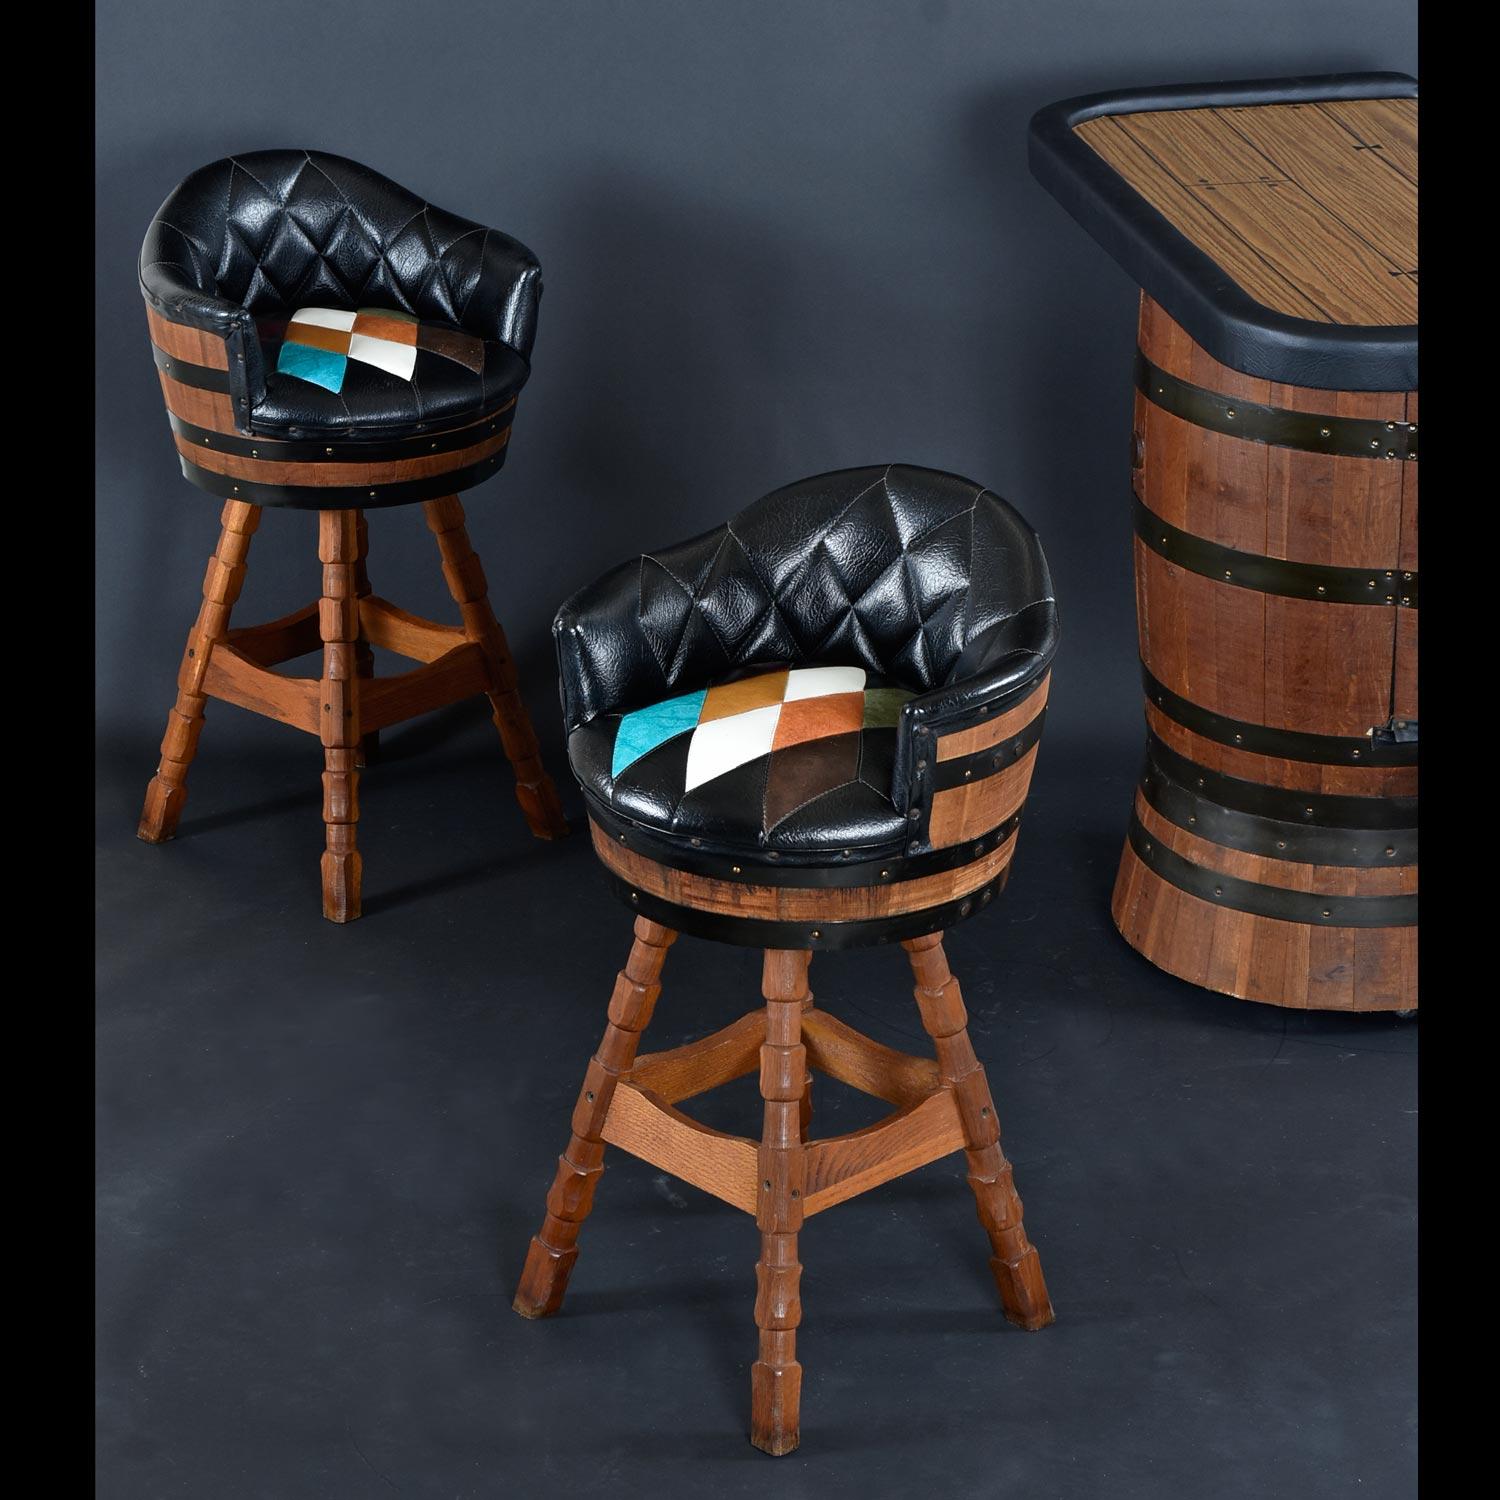 Vintage whisky barrel bar set made by Brothers Furniture Corp. of Livermore, Kentucky. Who know’s whiskey better than Kentucky? This bar set captures the spirit of America itself, scrappy and steadfast. Made from hearty solid oak whiskey barrels,